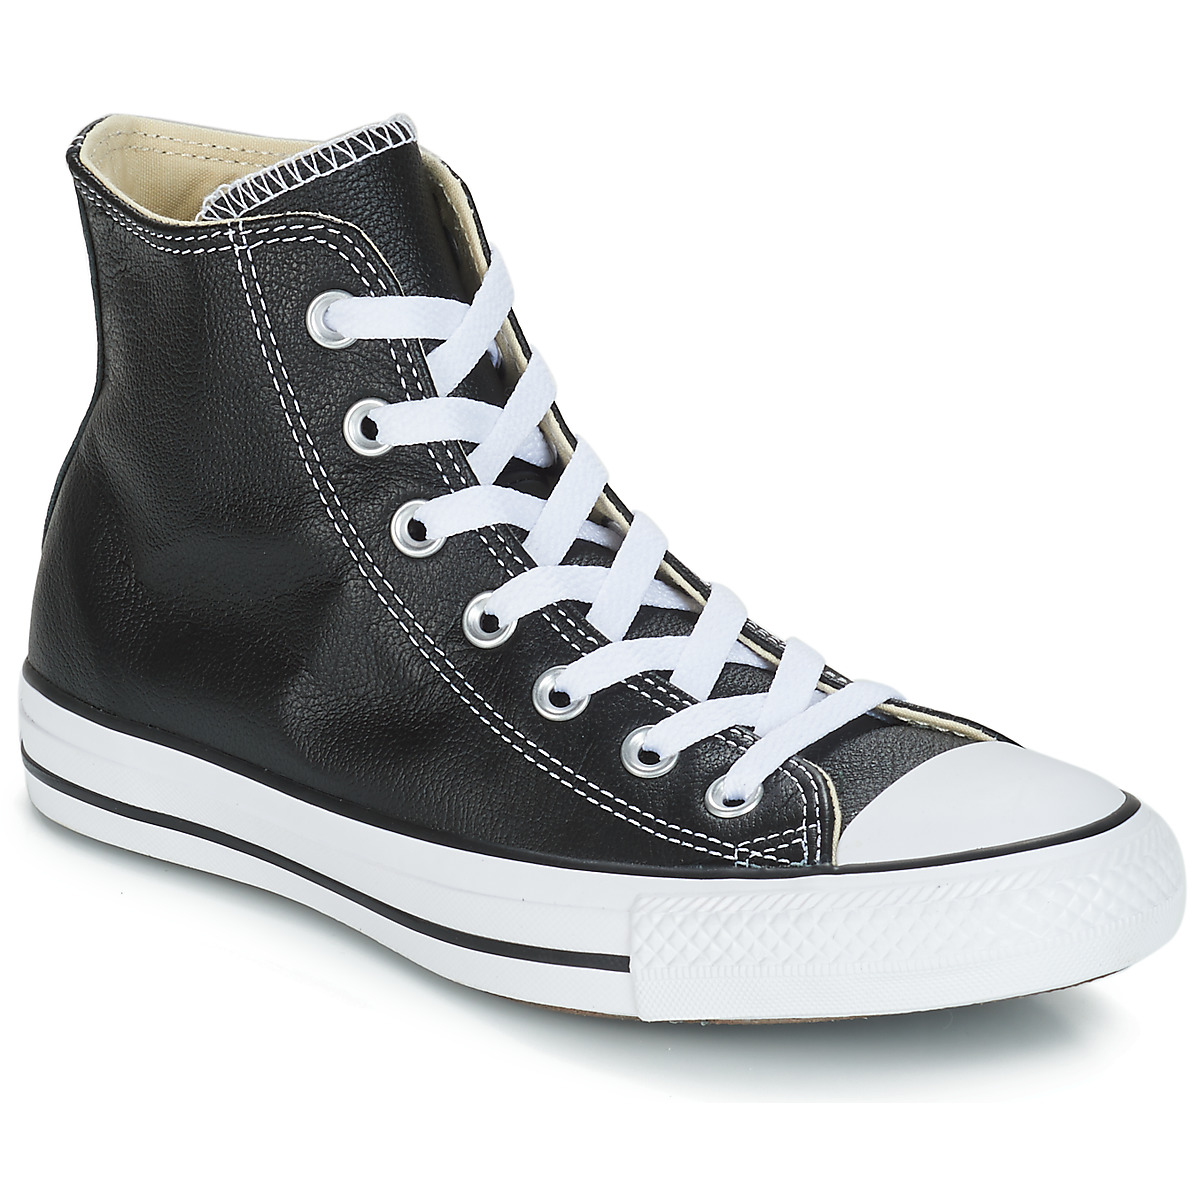 Ongeschikt Familielid Misbruik Converse Chuck Taylor All Star CORE LEATHER HI Black - Free delivery |  Spartoo NET ! - Shoes High top trainers USD/$94.00